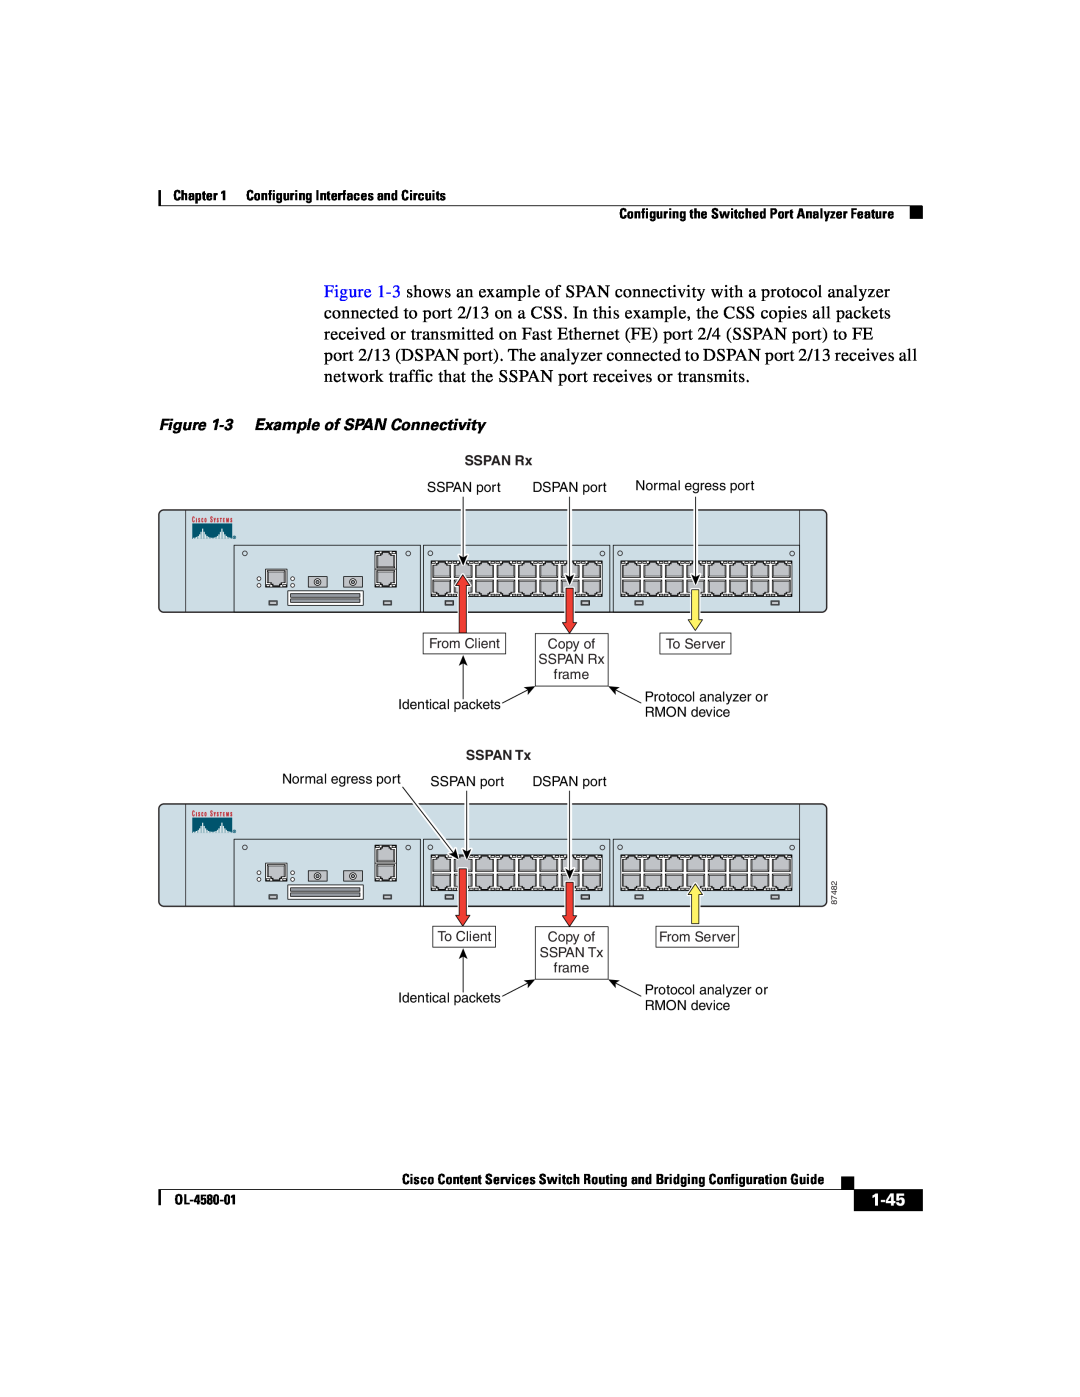 Cisco Systems OL-4580-01 manual 1-45, 3 Example of SPAN Connectivity, SSPAN Rx, SSPAN Tx 